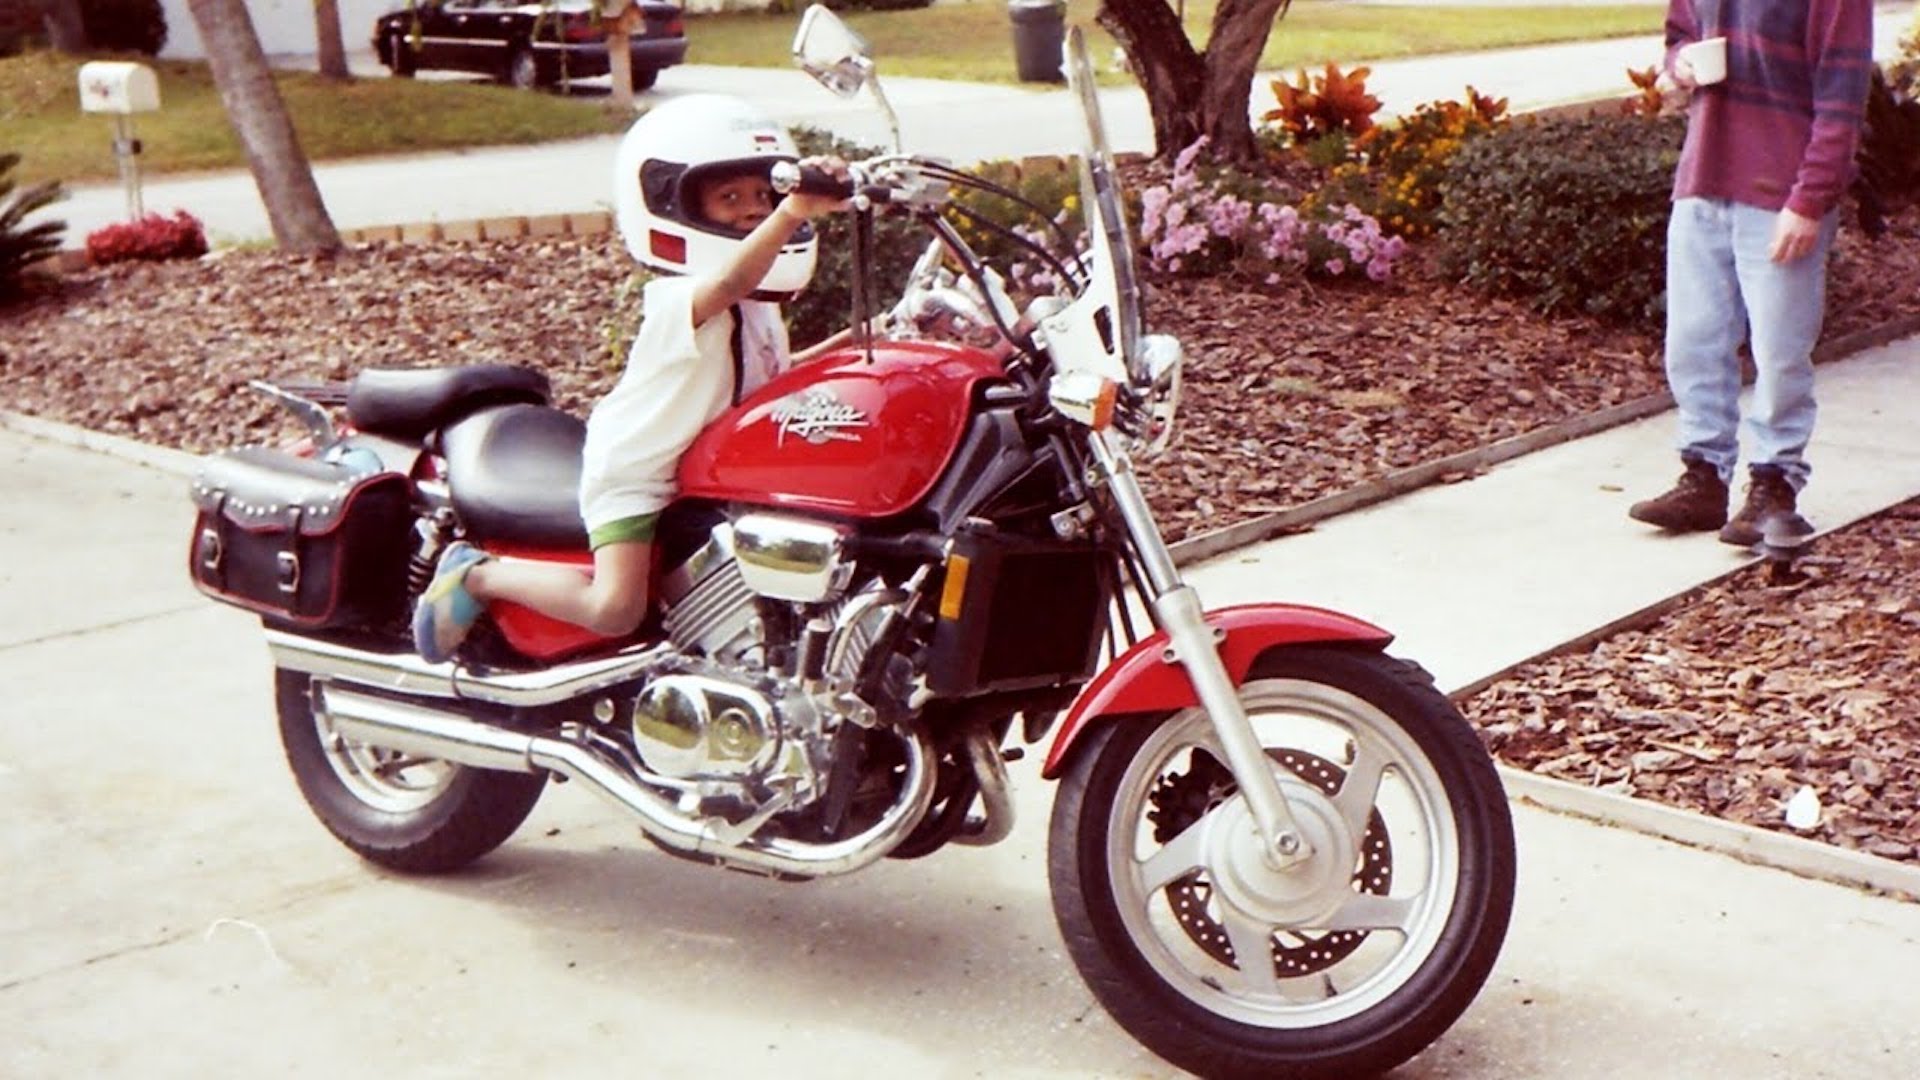 eric isaac on motorcycle